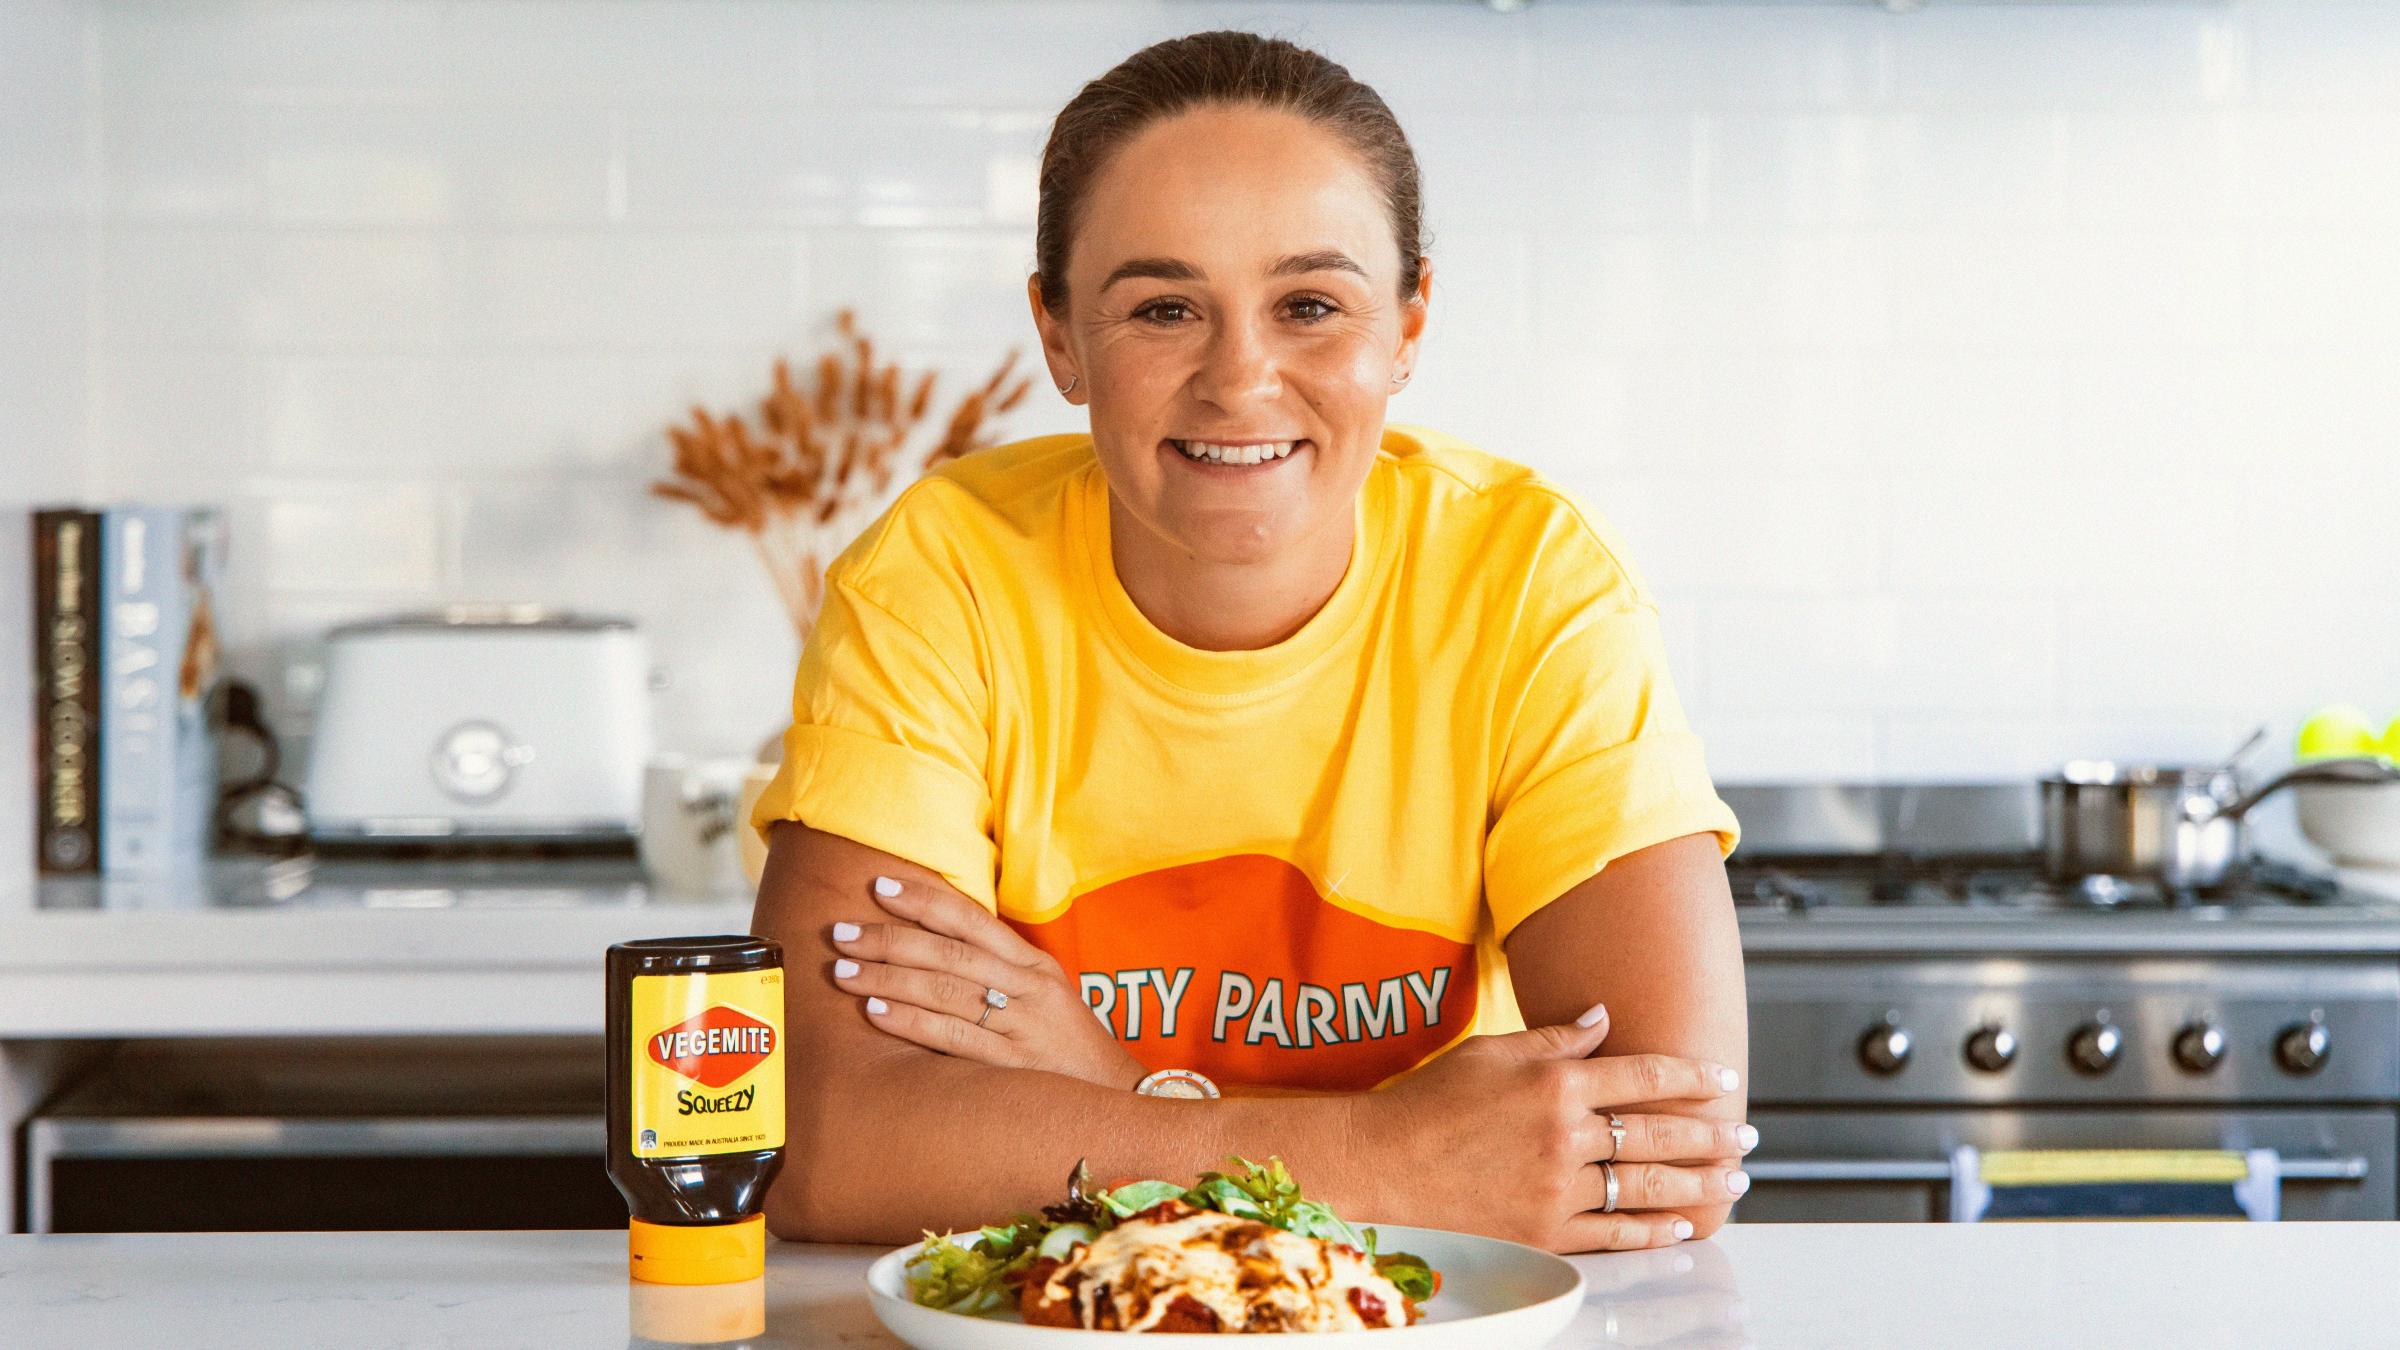 Ash Barty Unveils Her Idea For Australian Open Signature Dish - Vegemite  'Barty Parmy'!